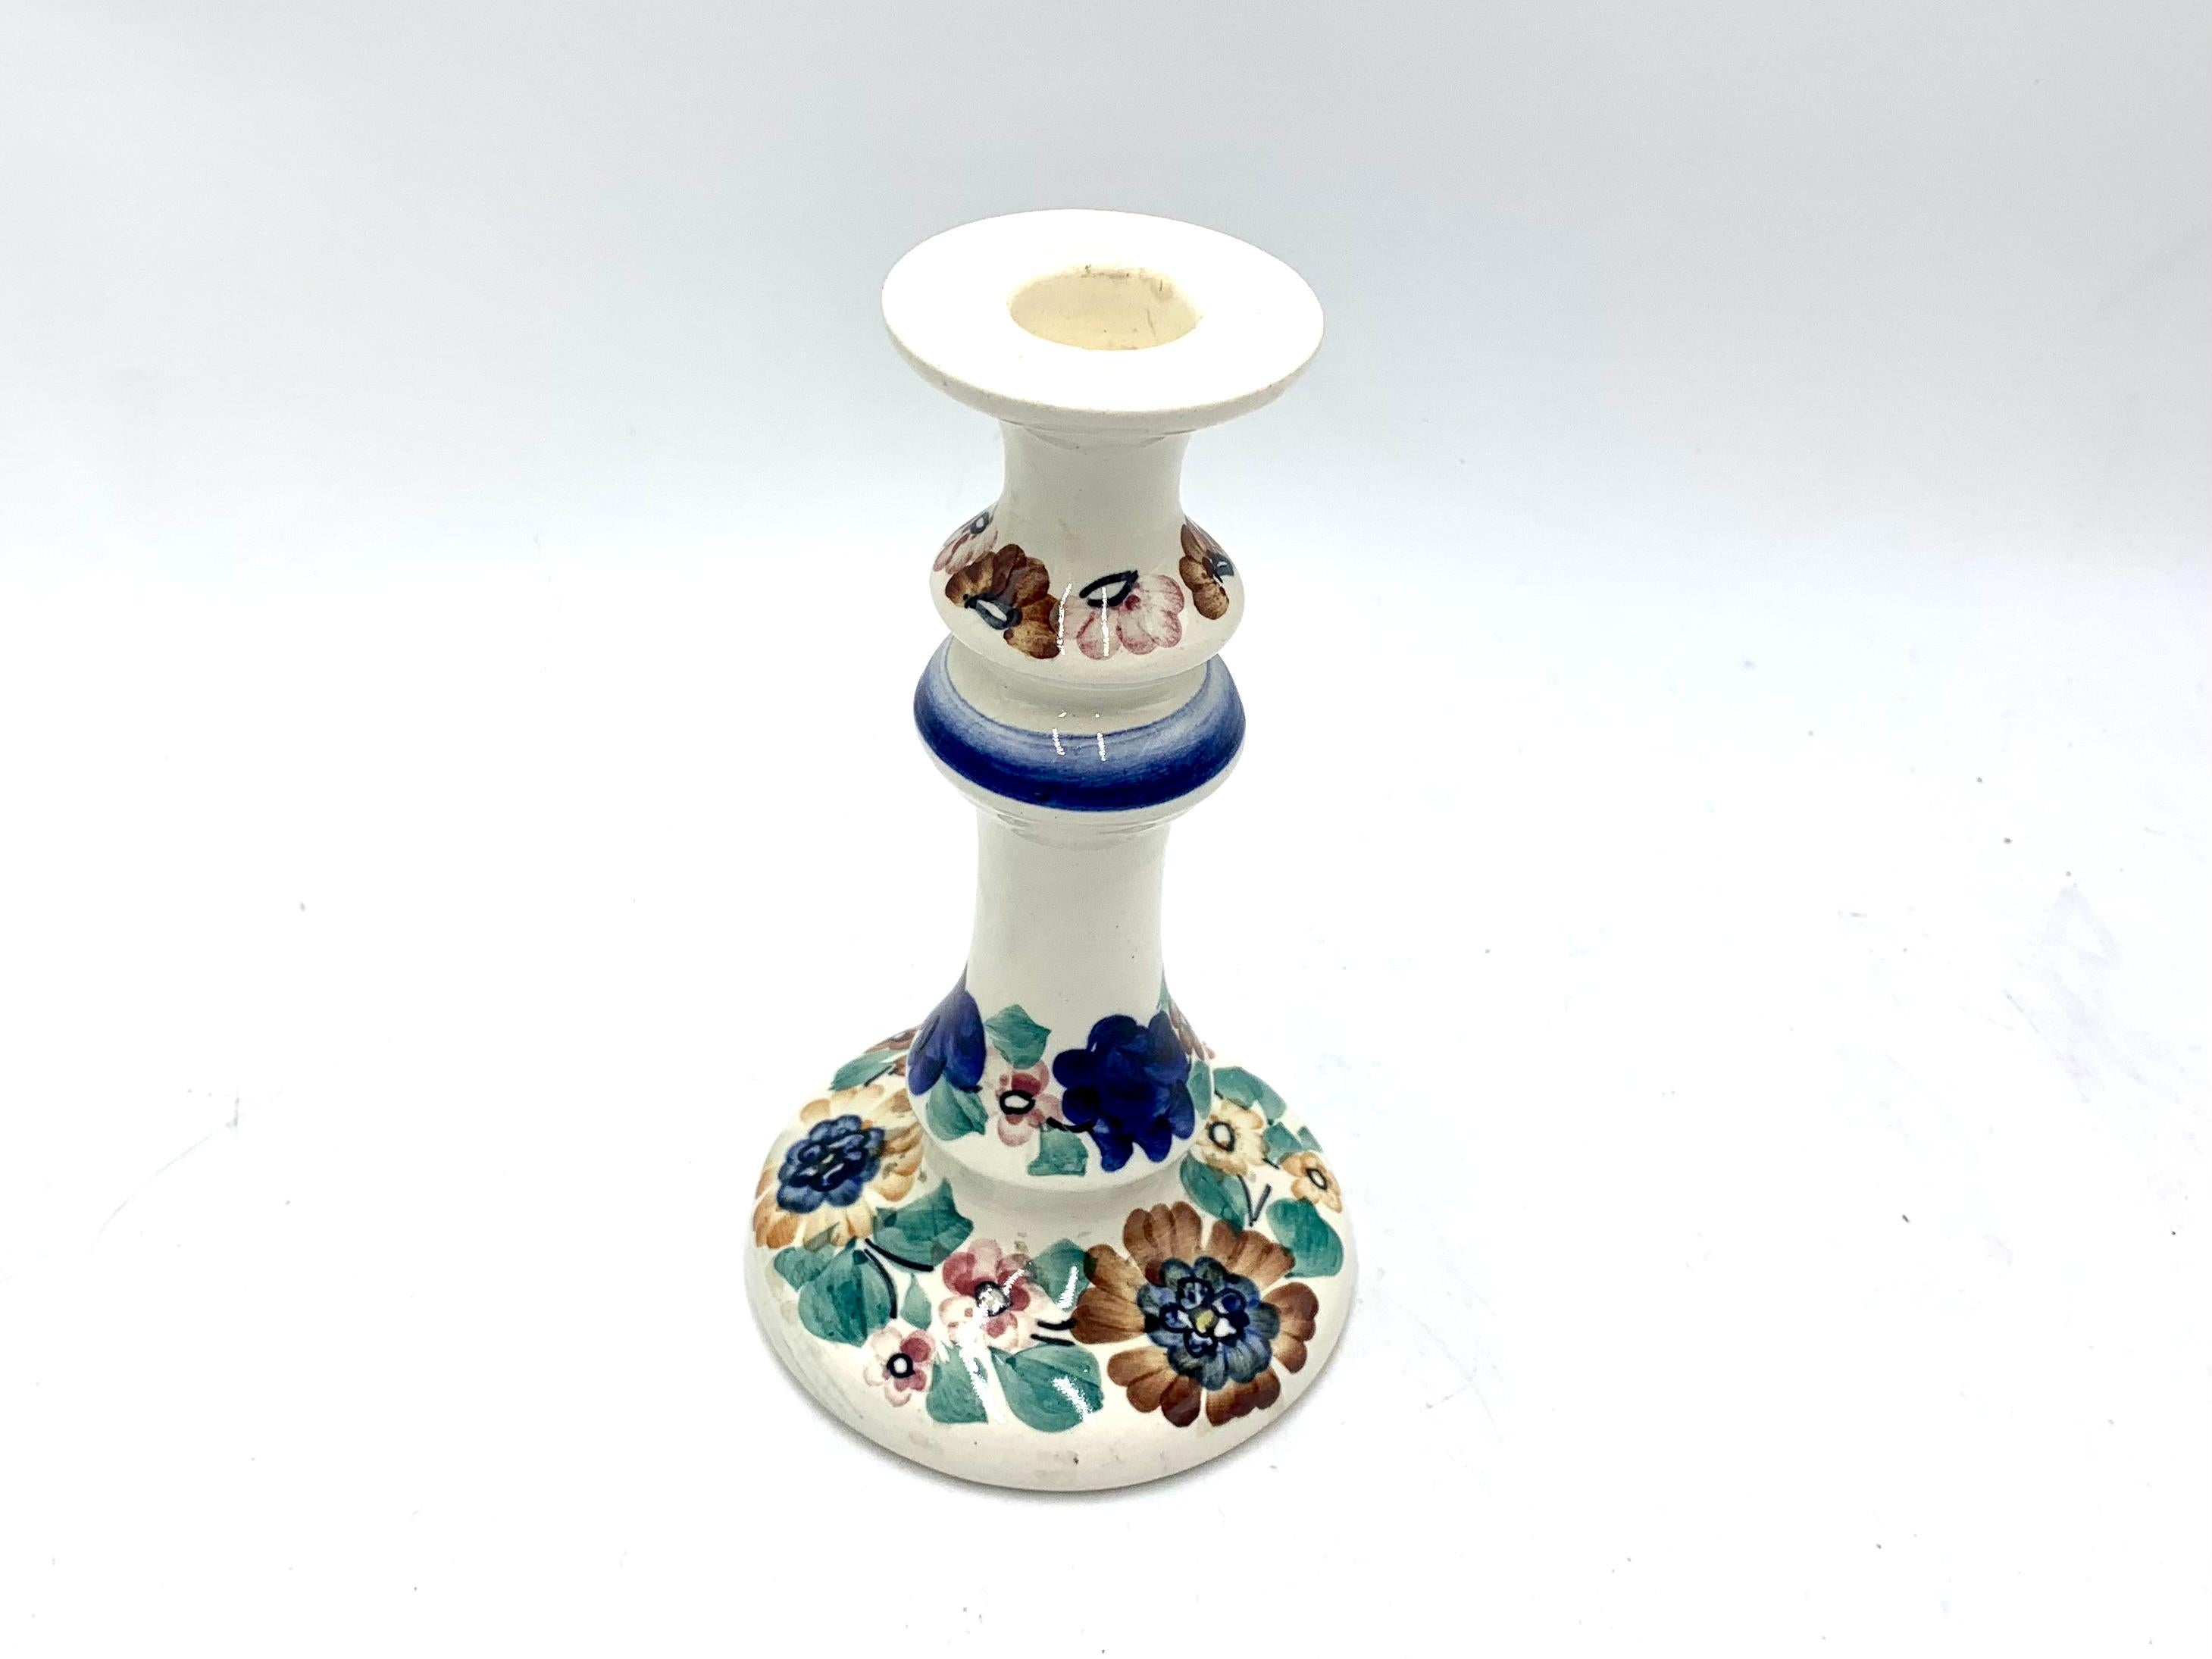 Candlestick made of faience in Poland by Wloclawek in the 1960s.

Very good condition

Measures: height: 18cm diameter: 11cm.